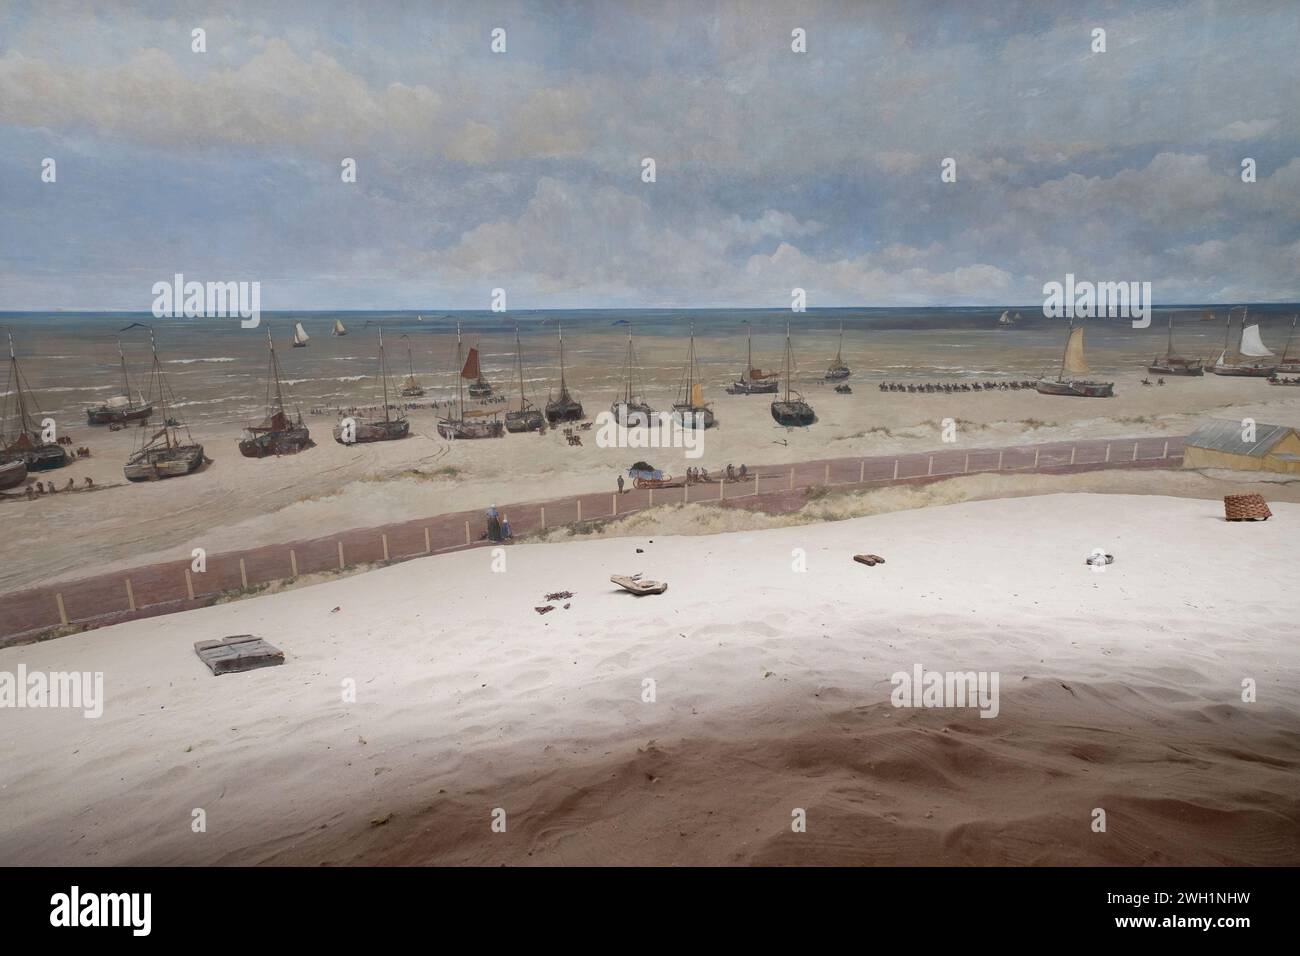 Small section of the giant cylindrical painting by the painter Mesdag, with fake terrain in the foreground in the famous Museum Mesdag in the Hague Stock Photo